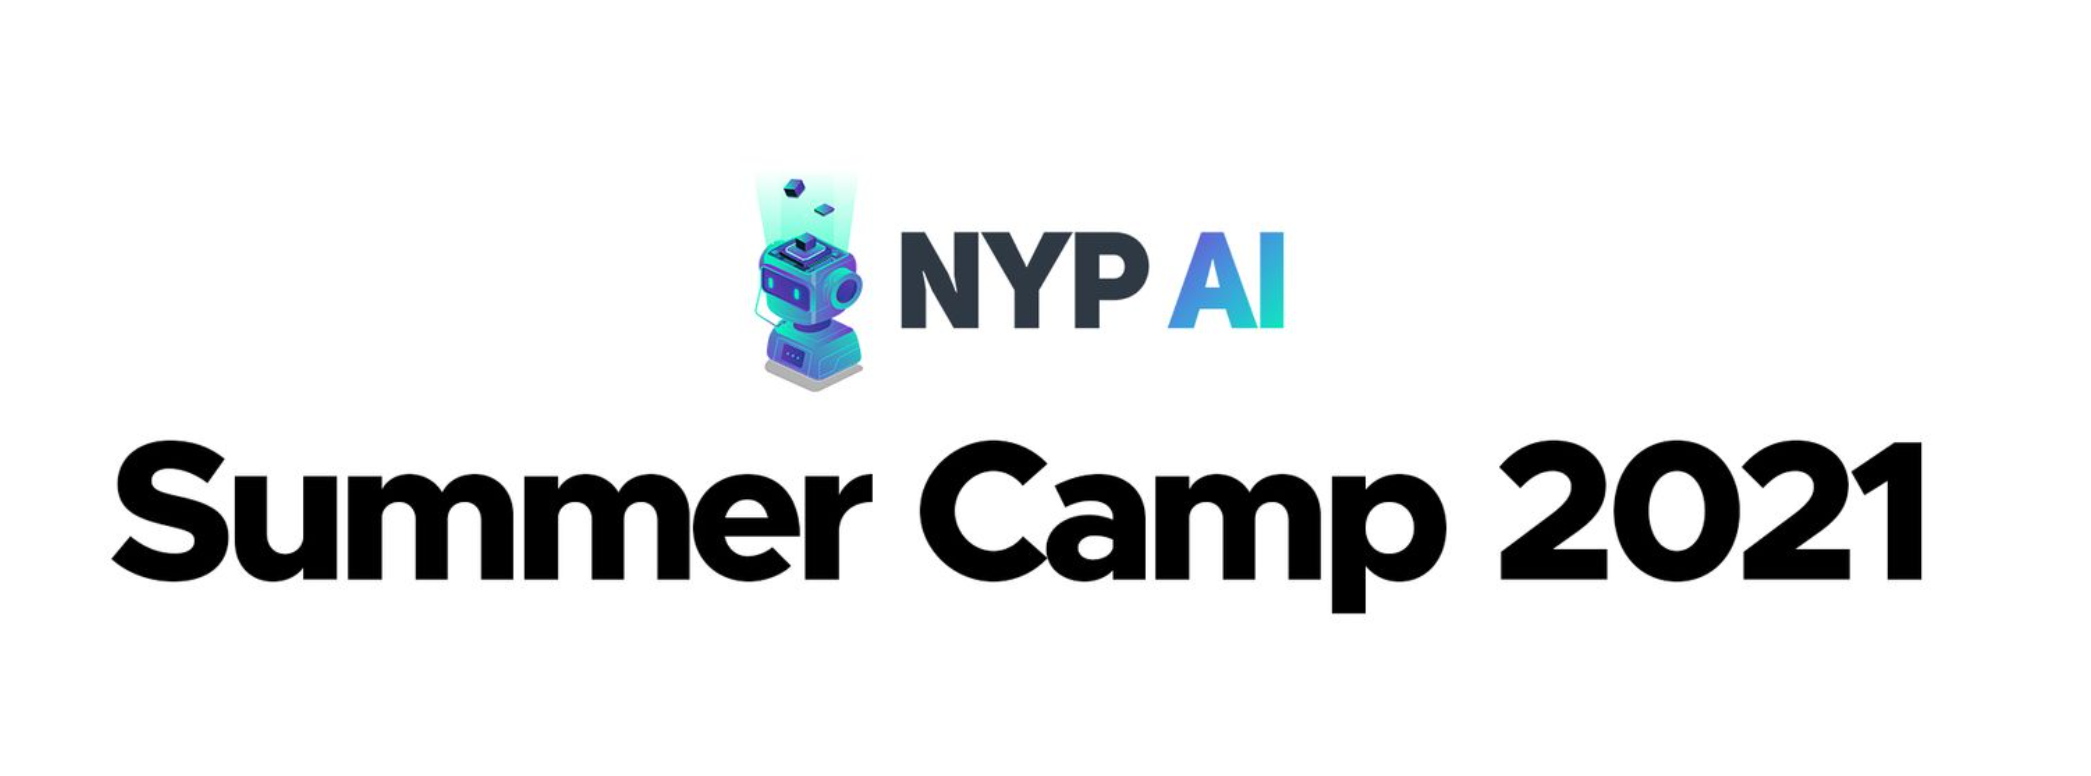 NYP AI: Our Journey (2020 - 2022)